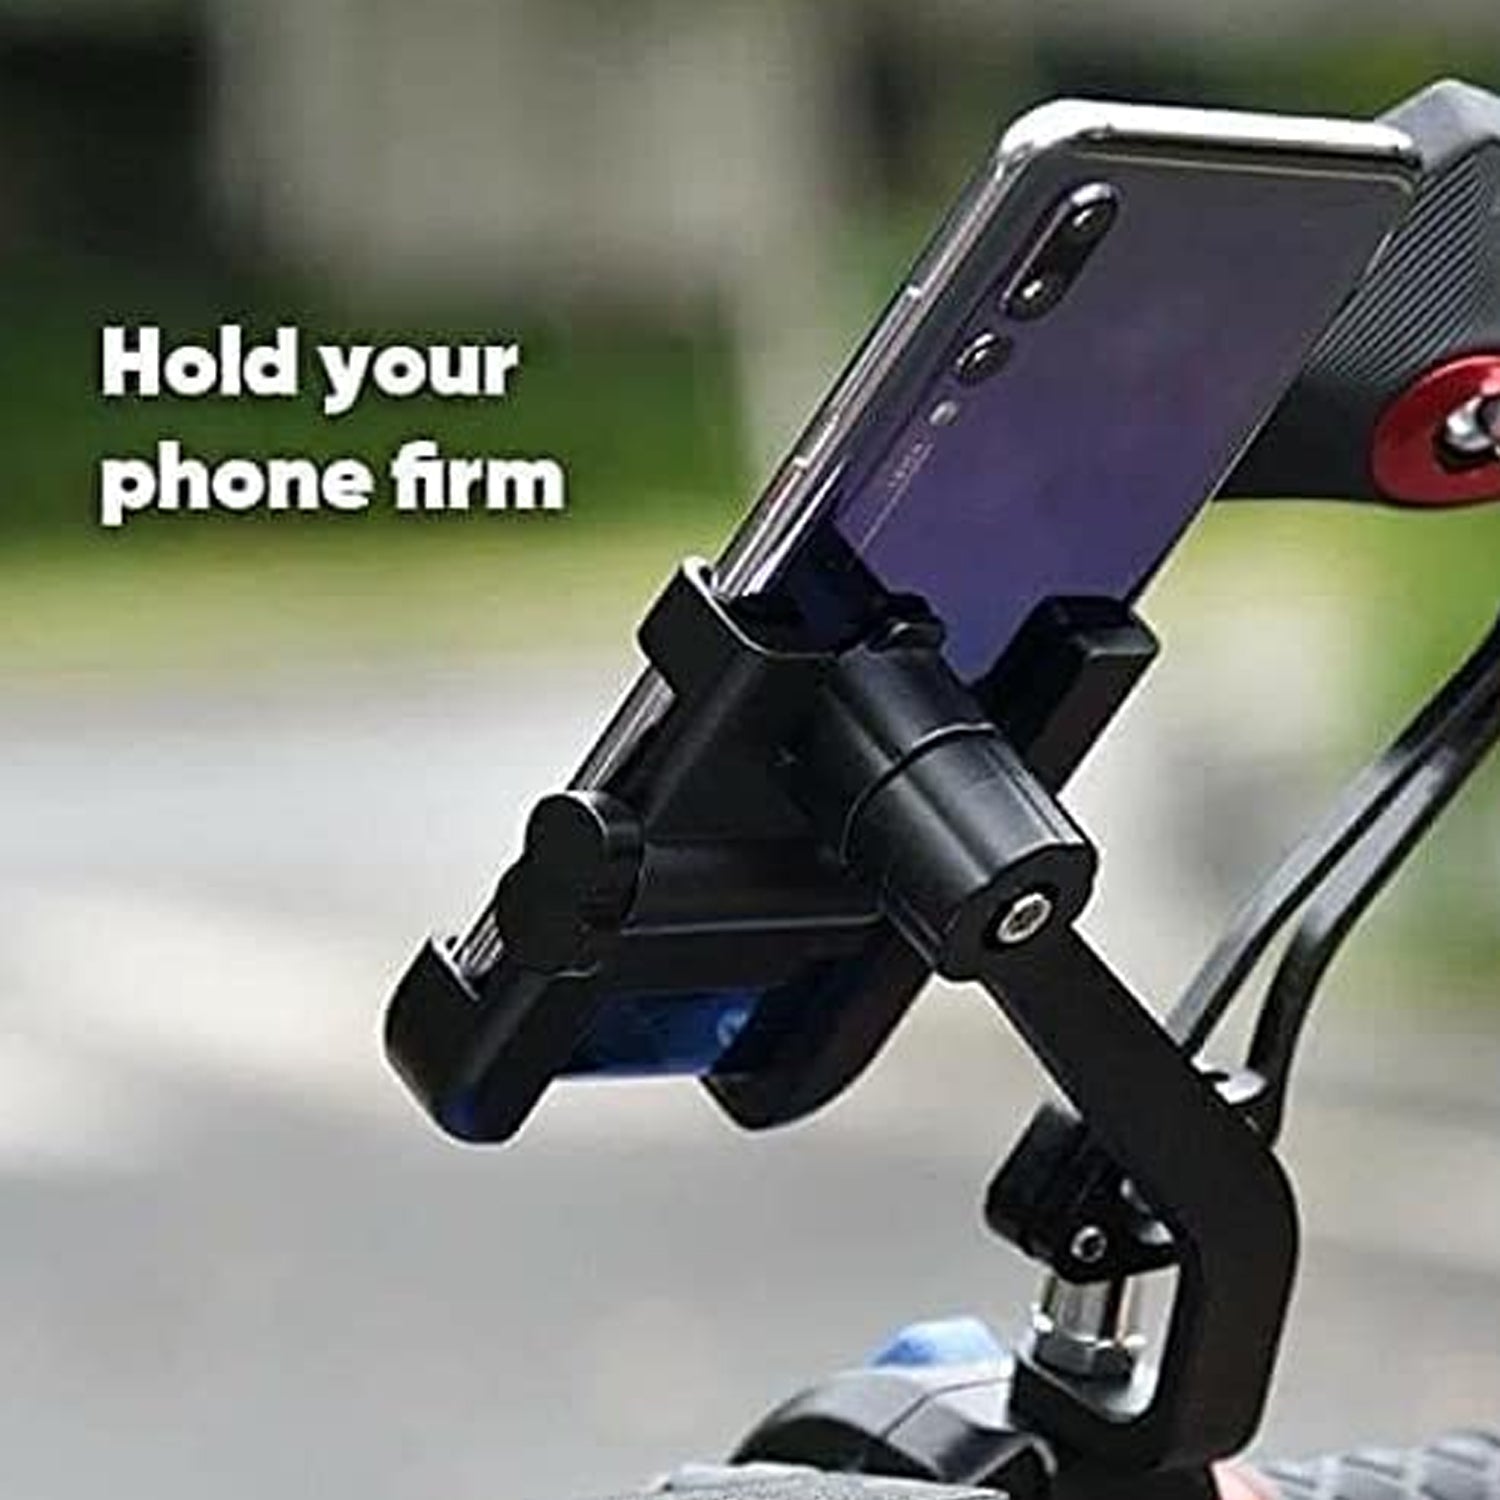 6706 Mobile Phone Holder With Easy Adjustable Rear View Mirror Mount Solid Metal Cradle Stand Suitable for Bike & Mobile Phones DeoDap